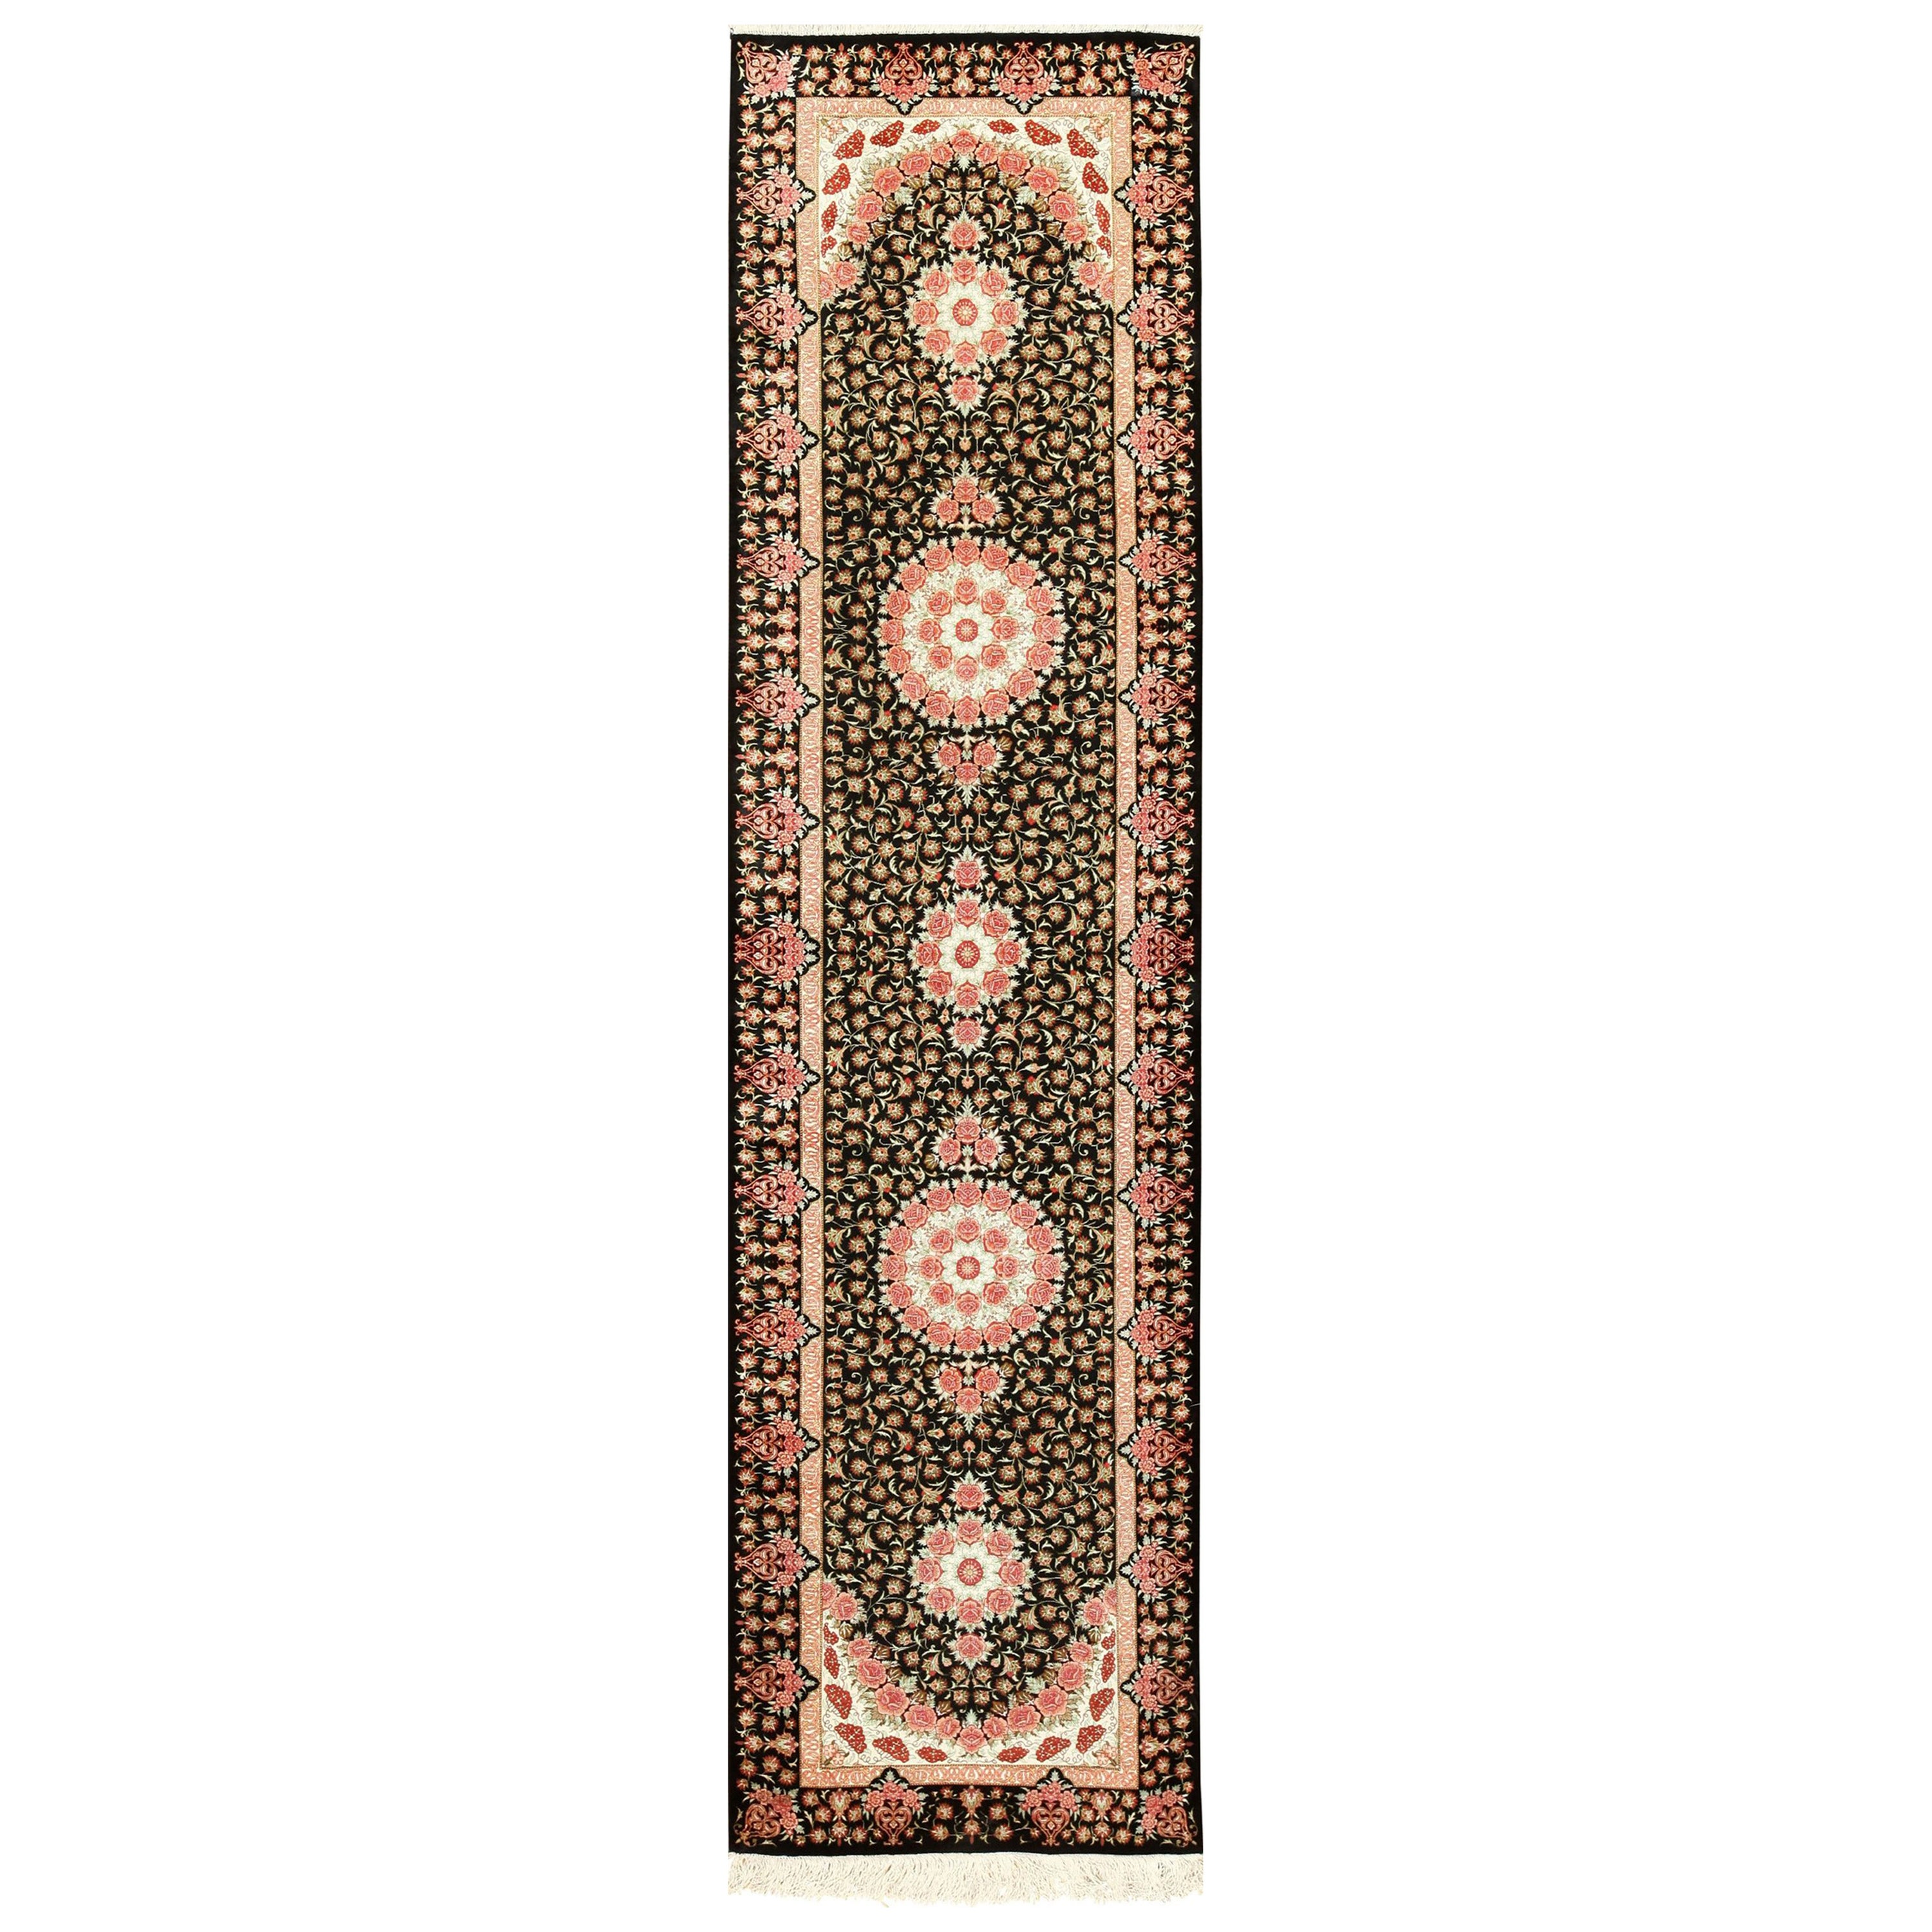 Nazmiyal Collection Black Background Silk Qum Persian Runner Rug 2'8" x 9'8" For Sale